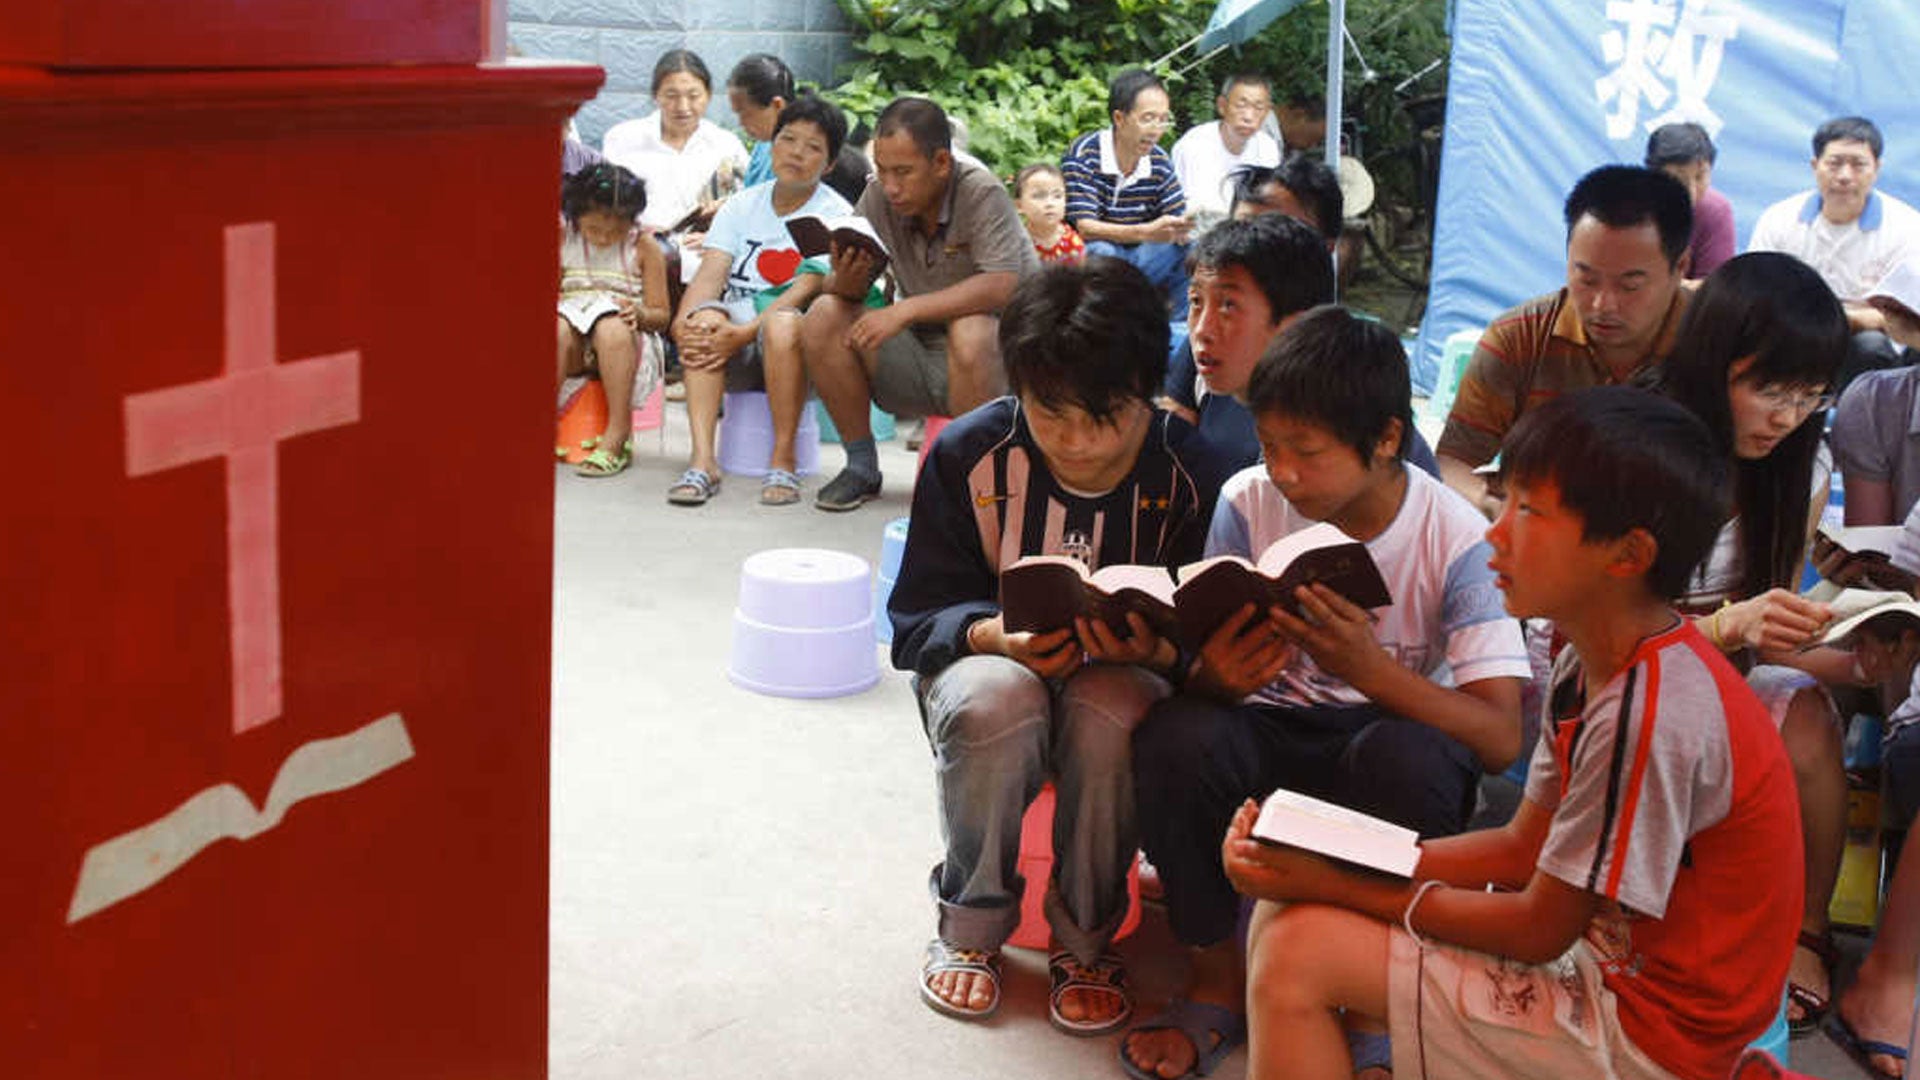 'No Regard for Religious Freedom': Chinese Officials Arrest 18 Adults, 10 Kids During Early Rain Church Worship Service